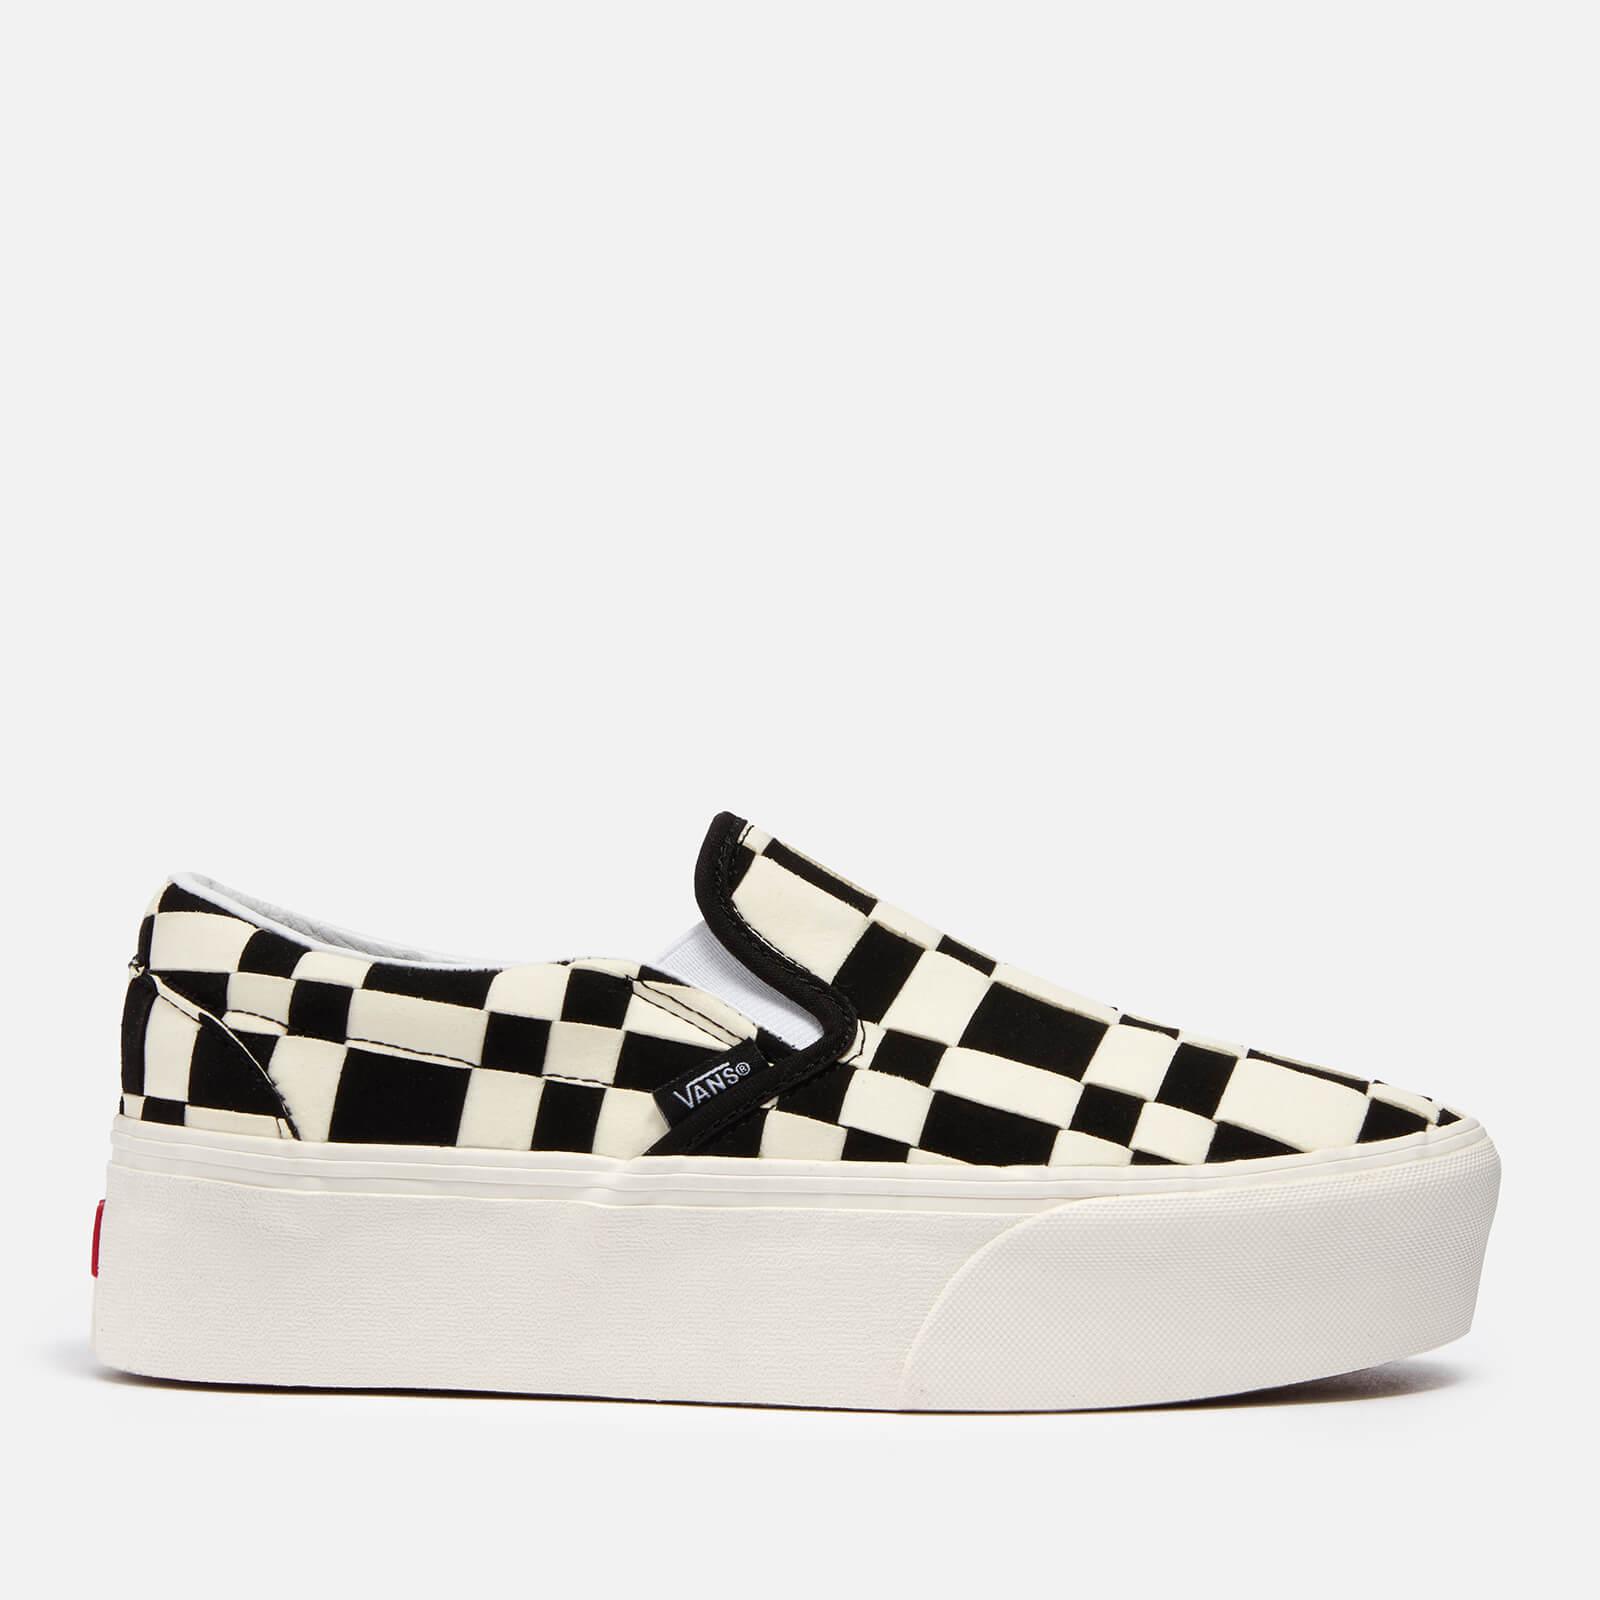 Vans Woven Check Stackform Faux Suede Trainers in Black | Lyst